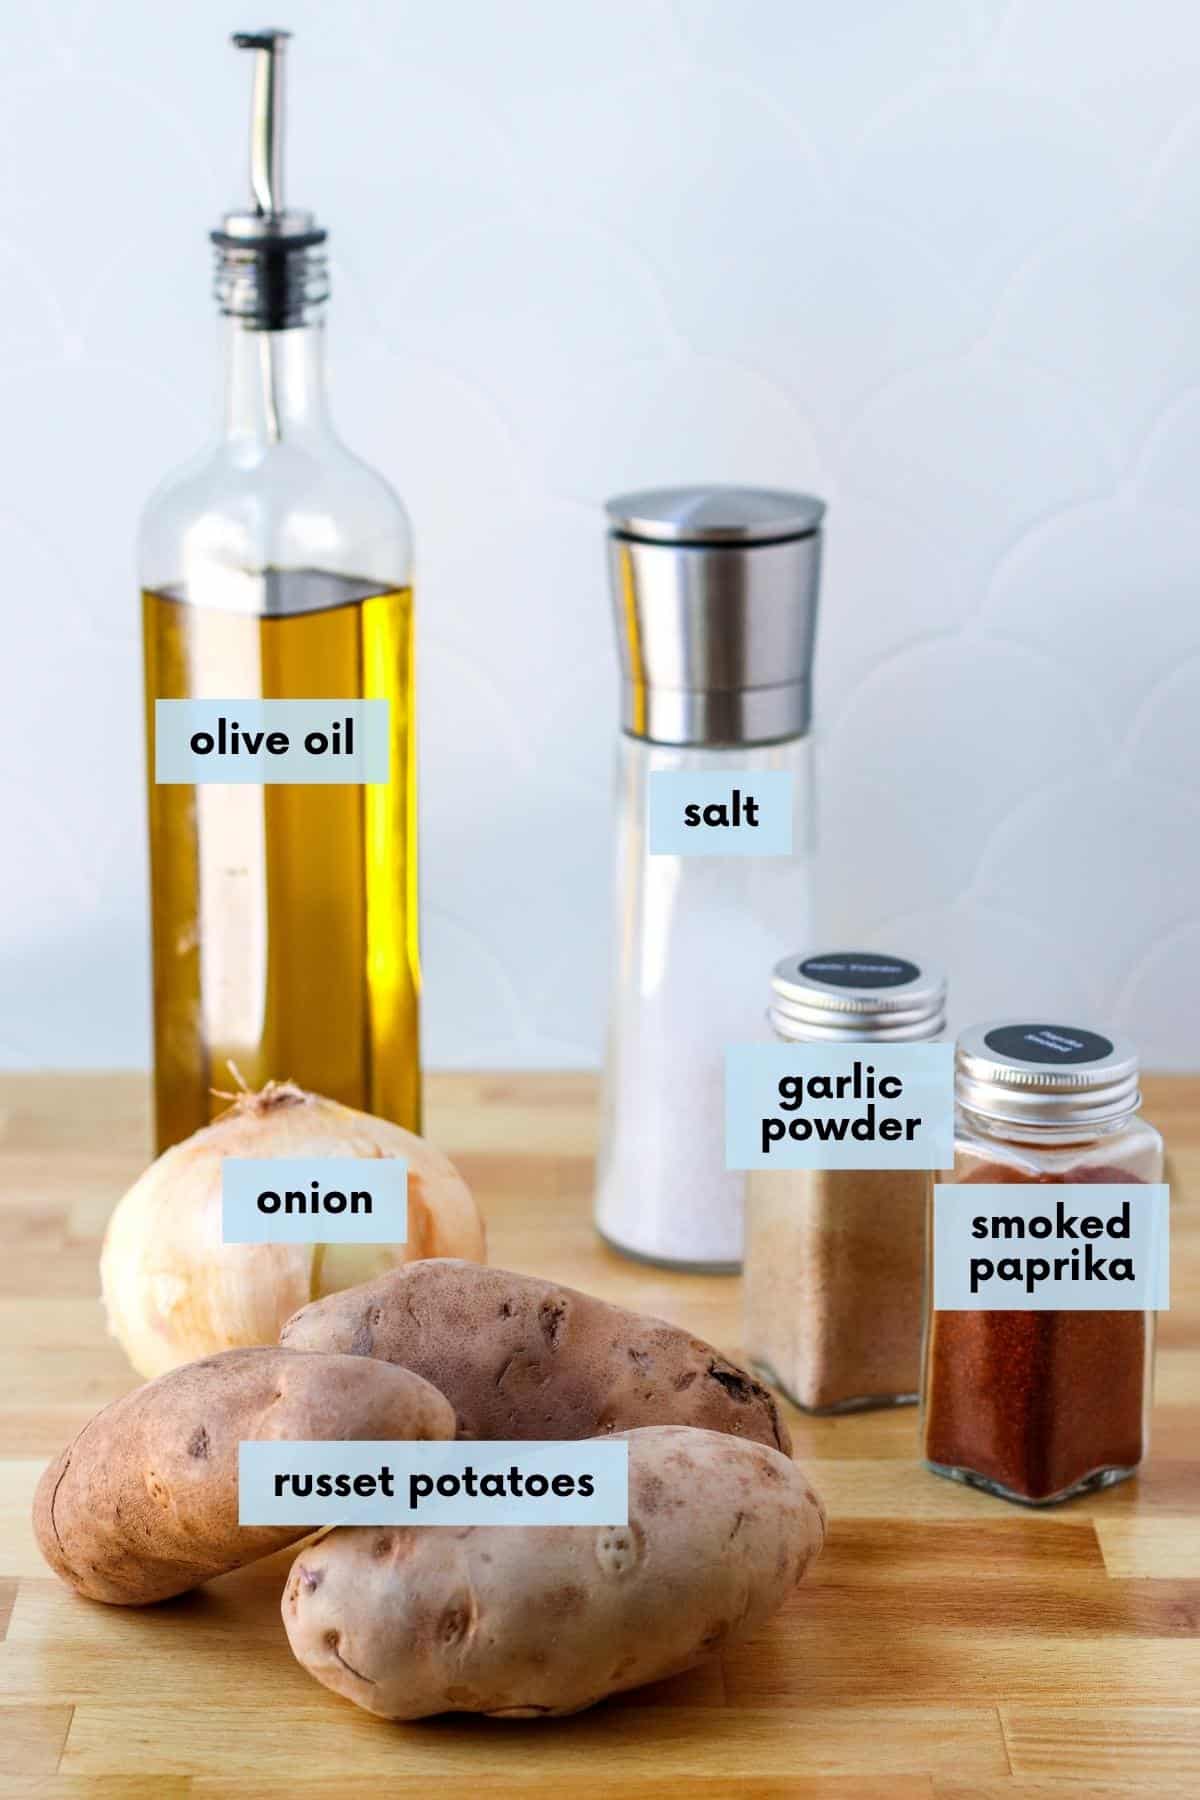 Labeled ingredients needed to make this recipe: Olive oil, salt, garlic powder, smoked paprika, onion, and russet potatoes.